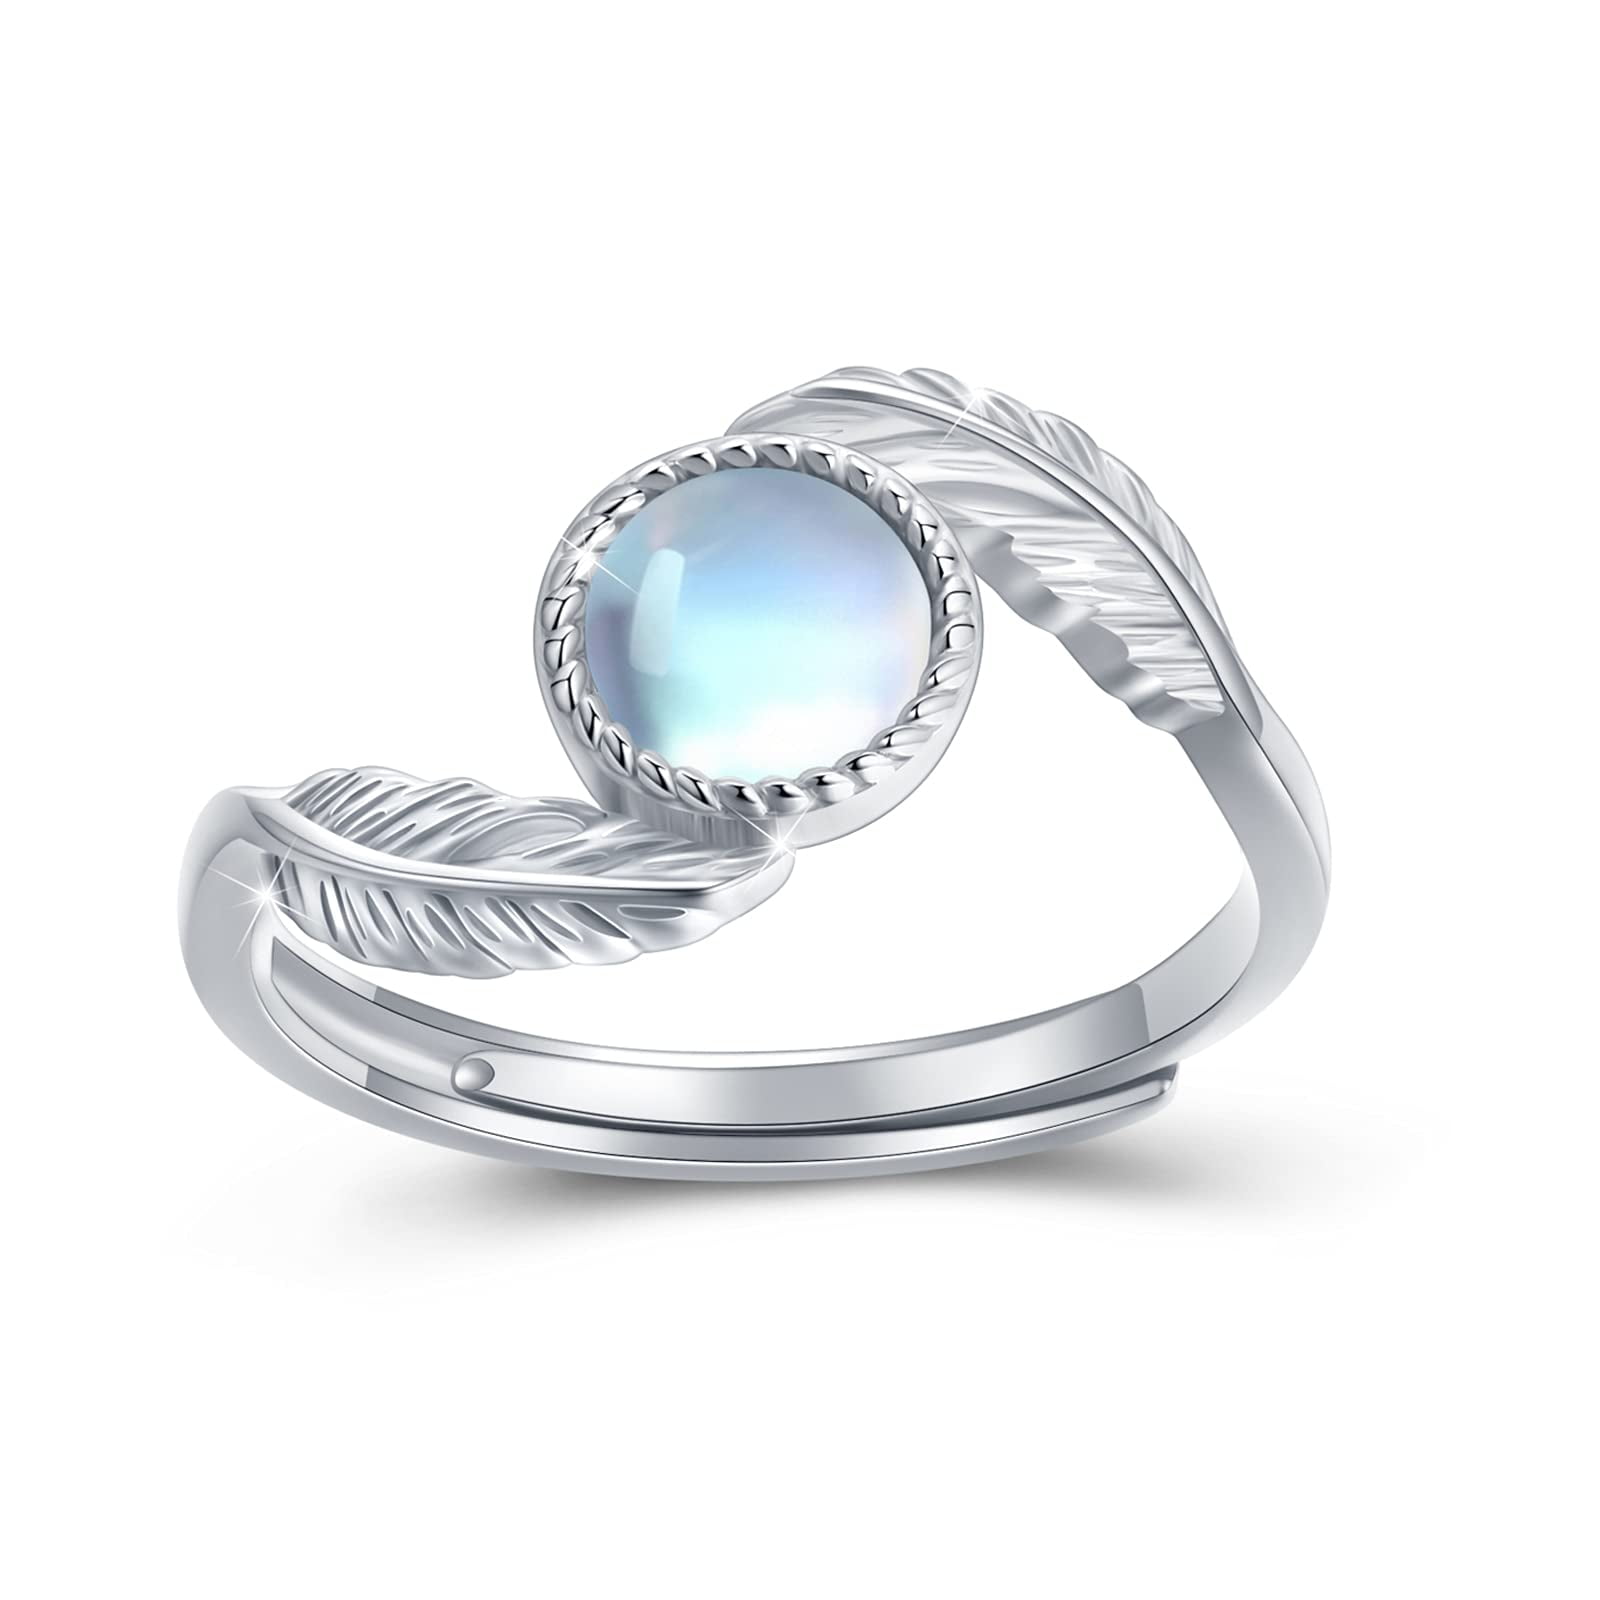 Rainbow Moonstone Gemstone 15pcs Rings Wholesale Lot 925 Silver Plated WHR-5 